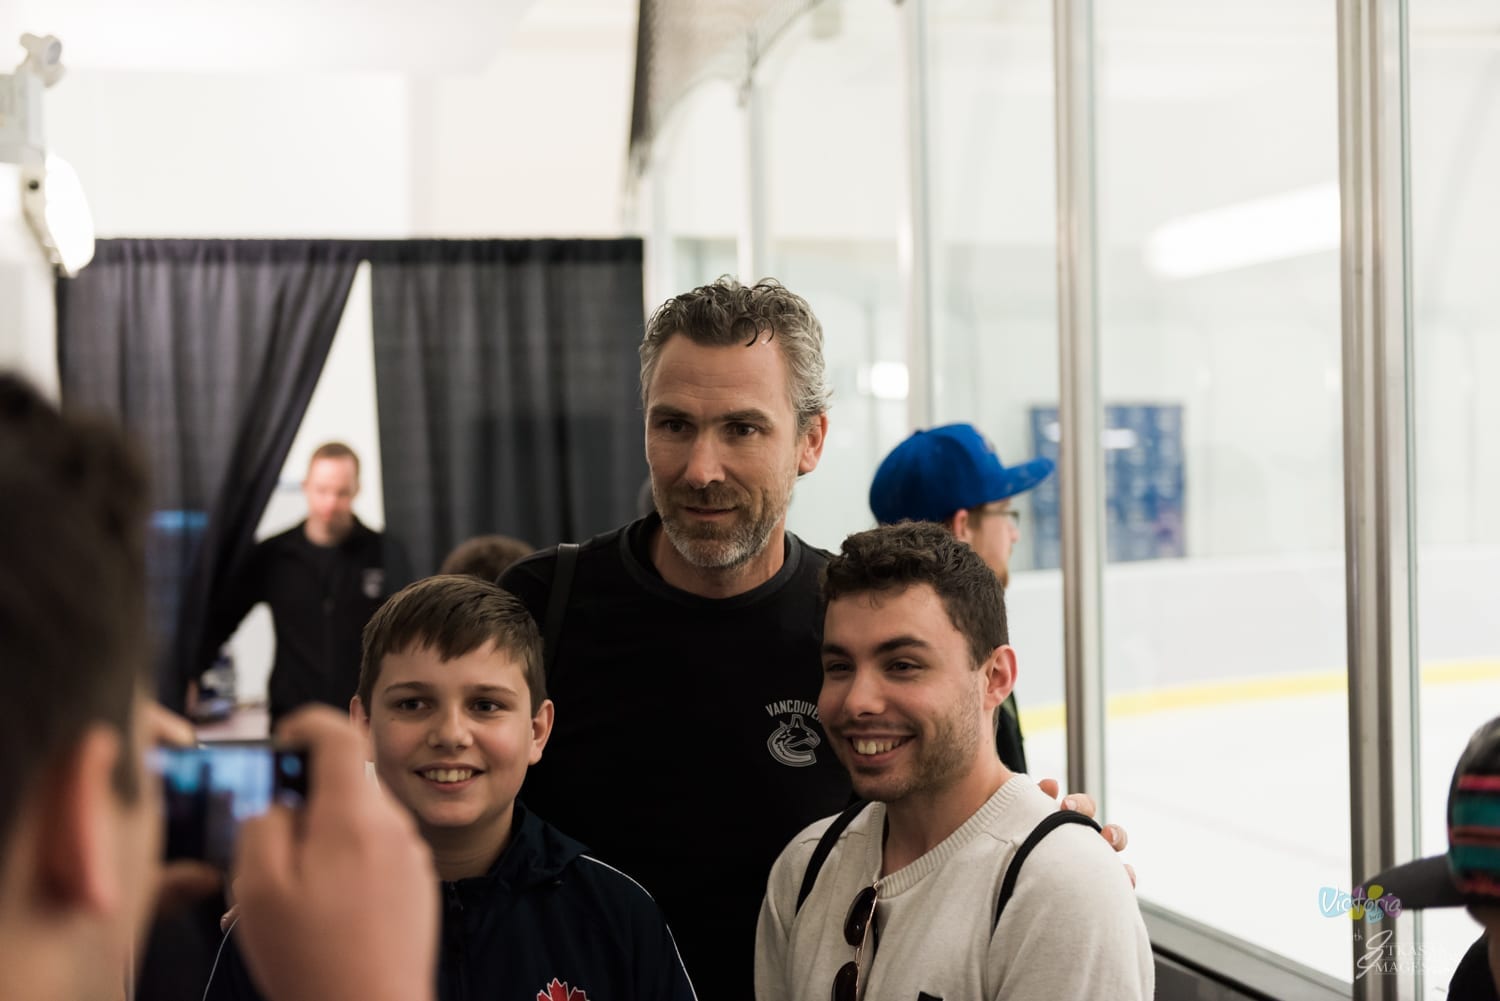 Trevor Linden takes time to meet local fans. Photo by John Varley for ItkasanImages/ Victoria Buzz